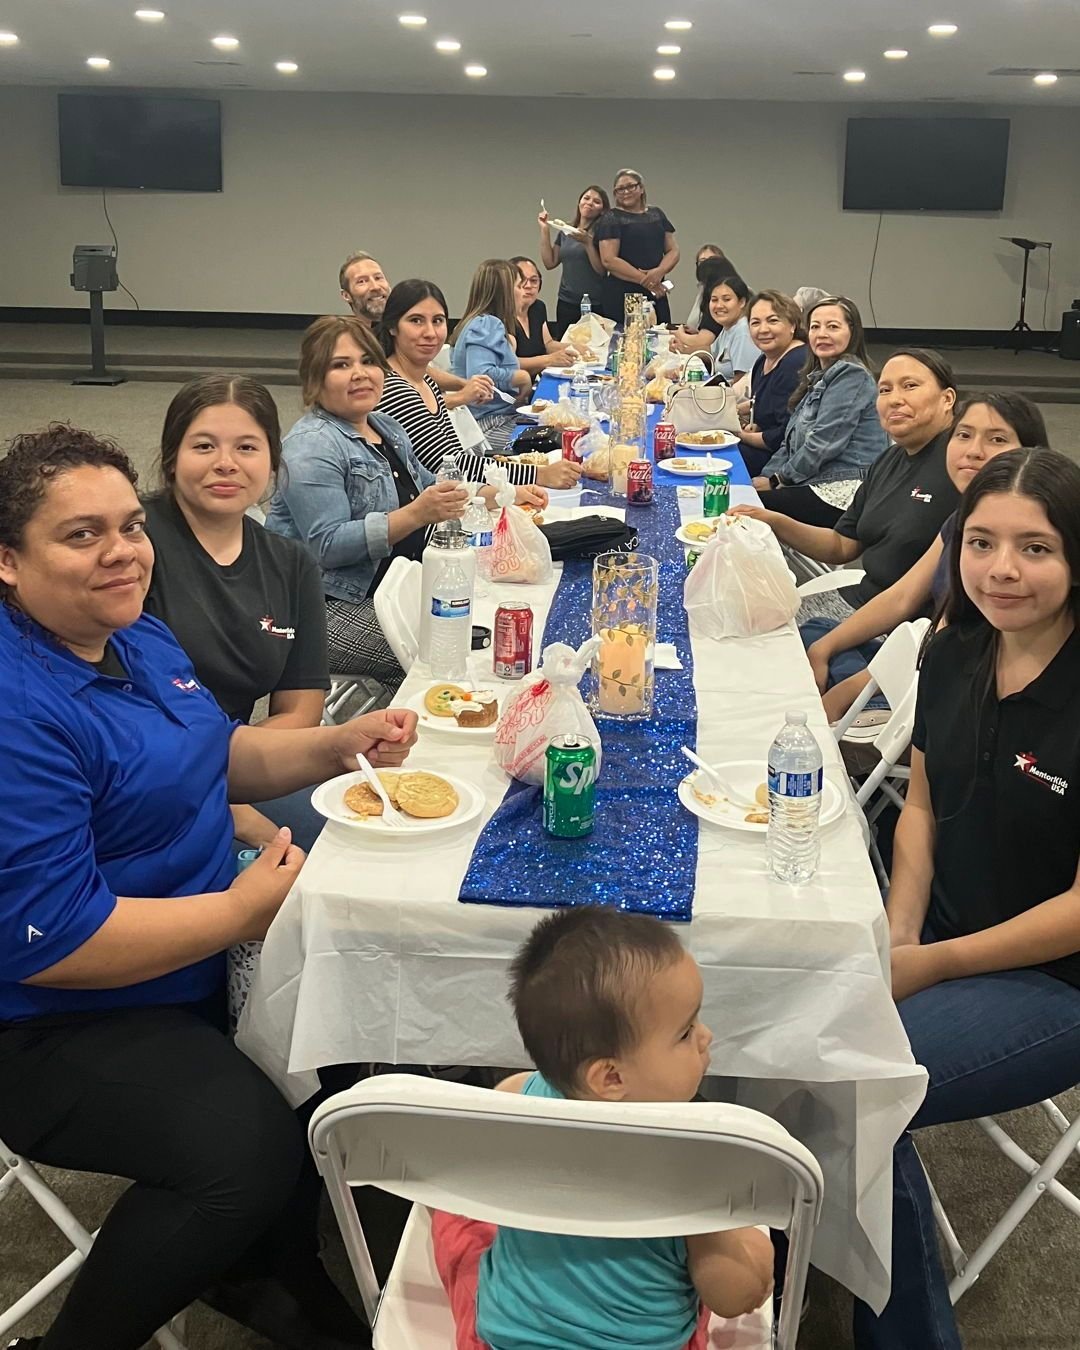 On Thursday, we honored our Maryvale Volunteers with a thank-you dinner. It was a beautiful night where we laughed 🤣 , cried 😭 , and encouraged🤗  each other. 😍 #Maryvale #Volunteers #Serve #Honor #thankyou #unidos #mentorkidsusa